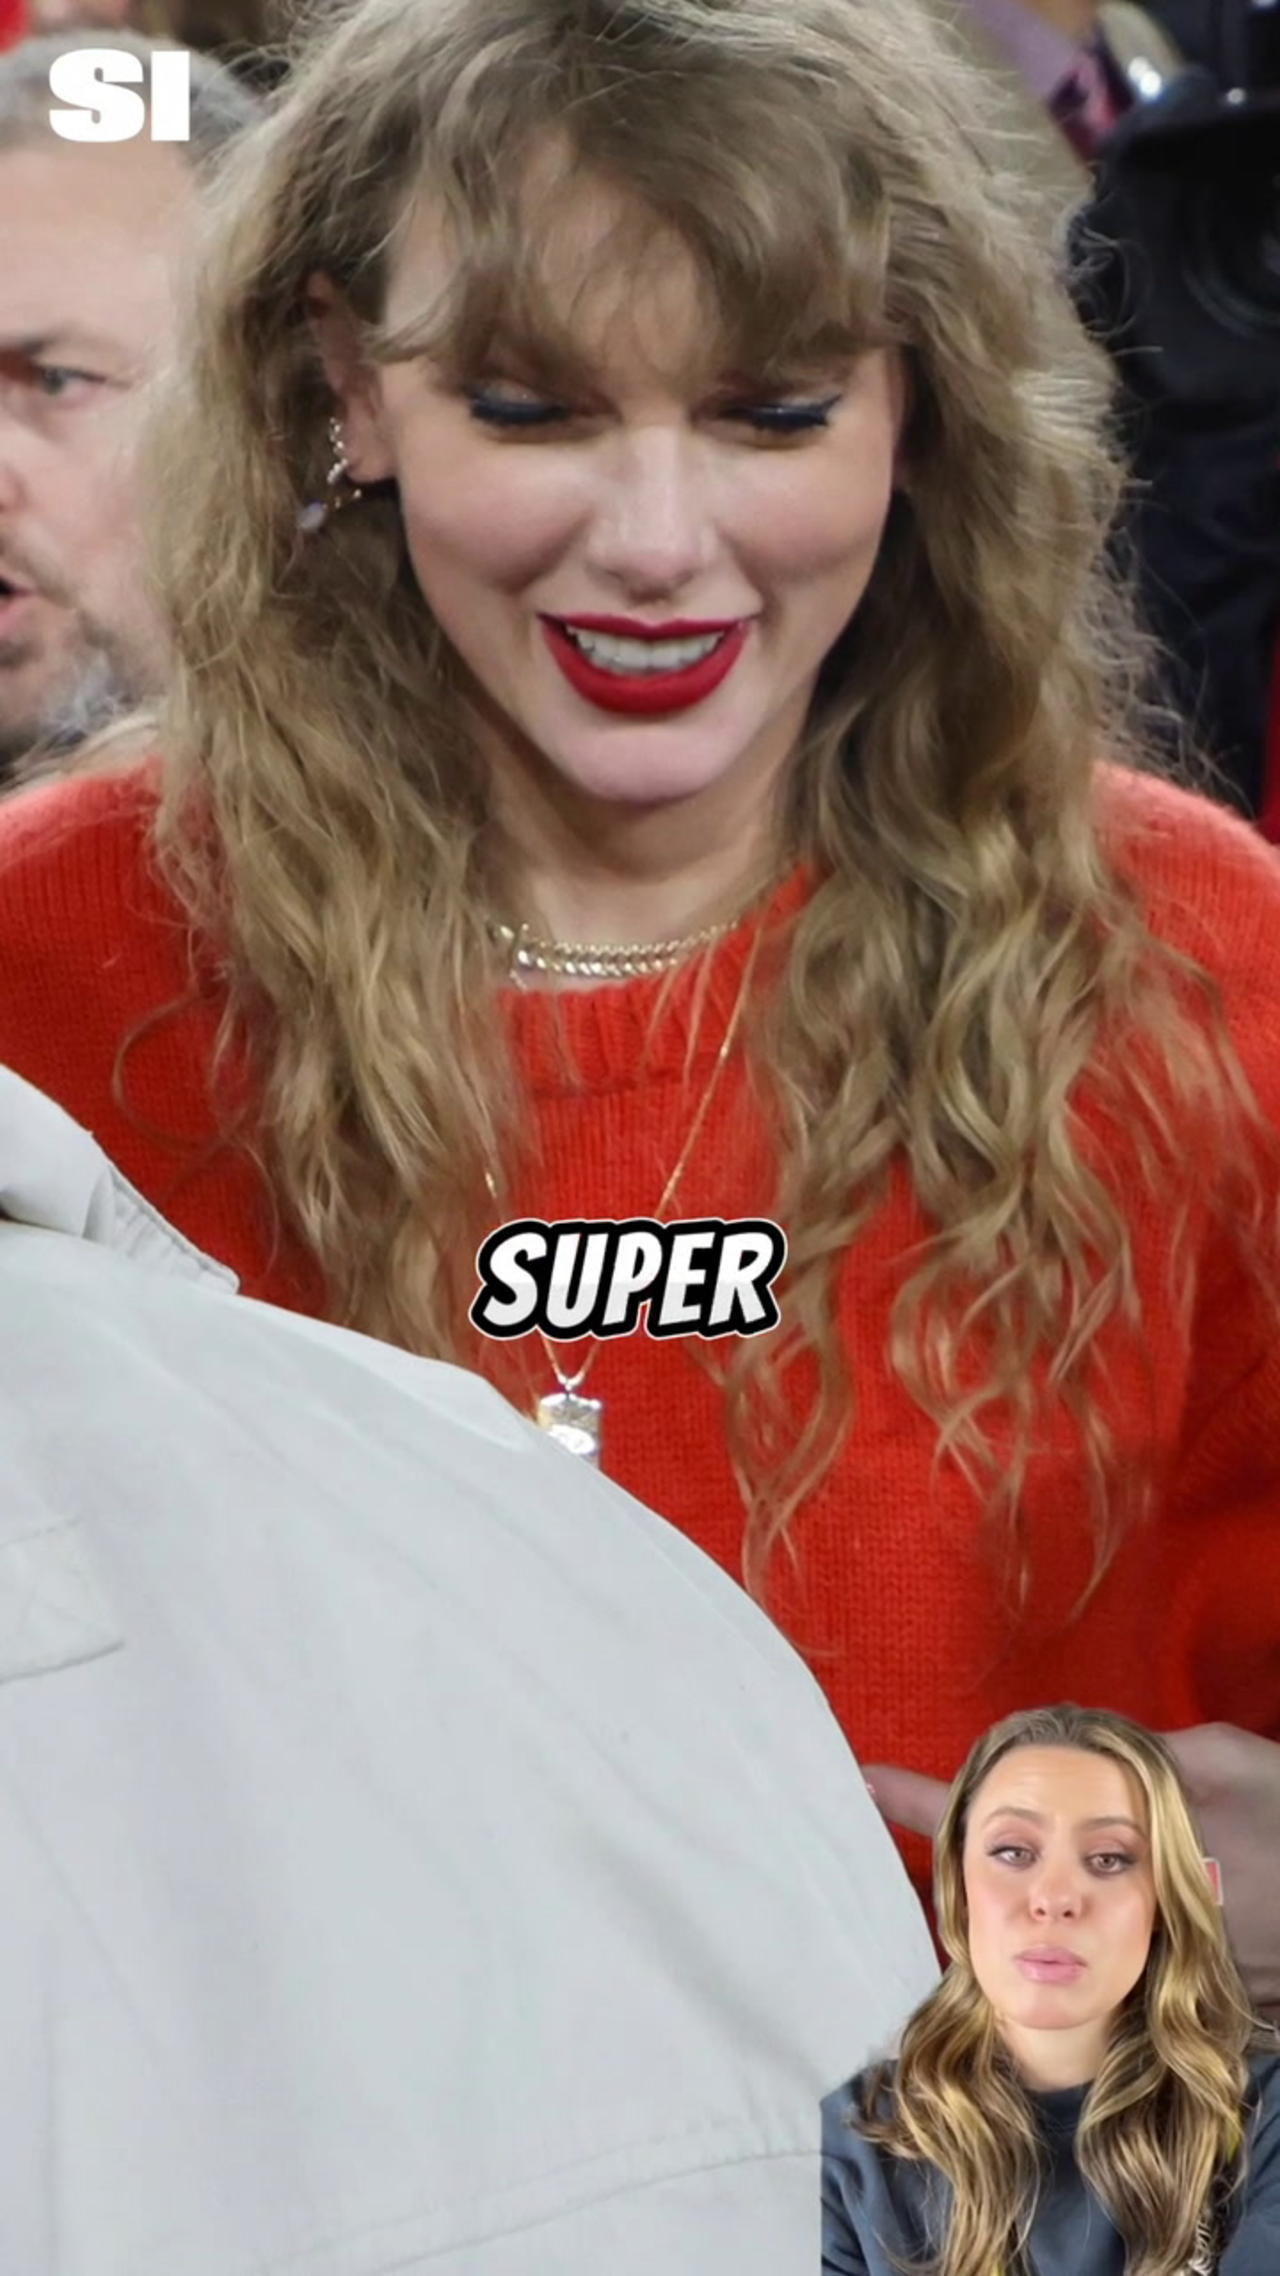 Ravens Fans Tell Taylor Swift 'You're Ruining Football'